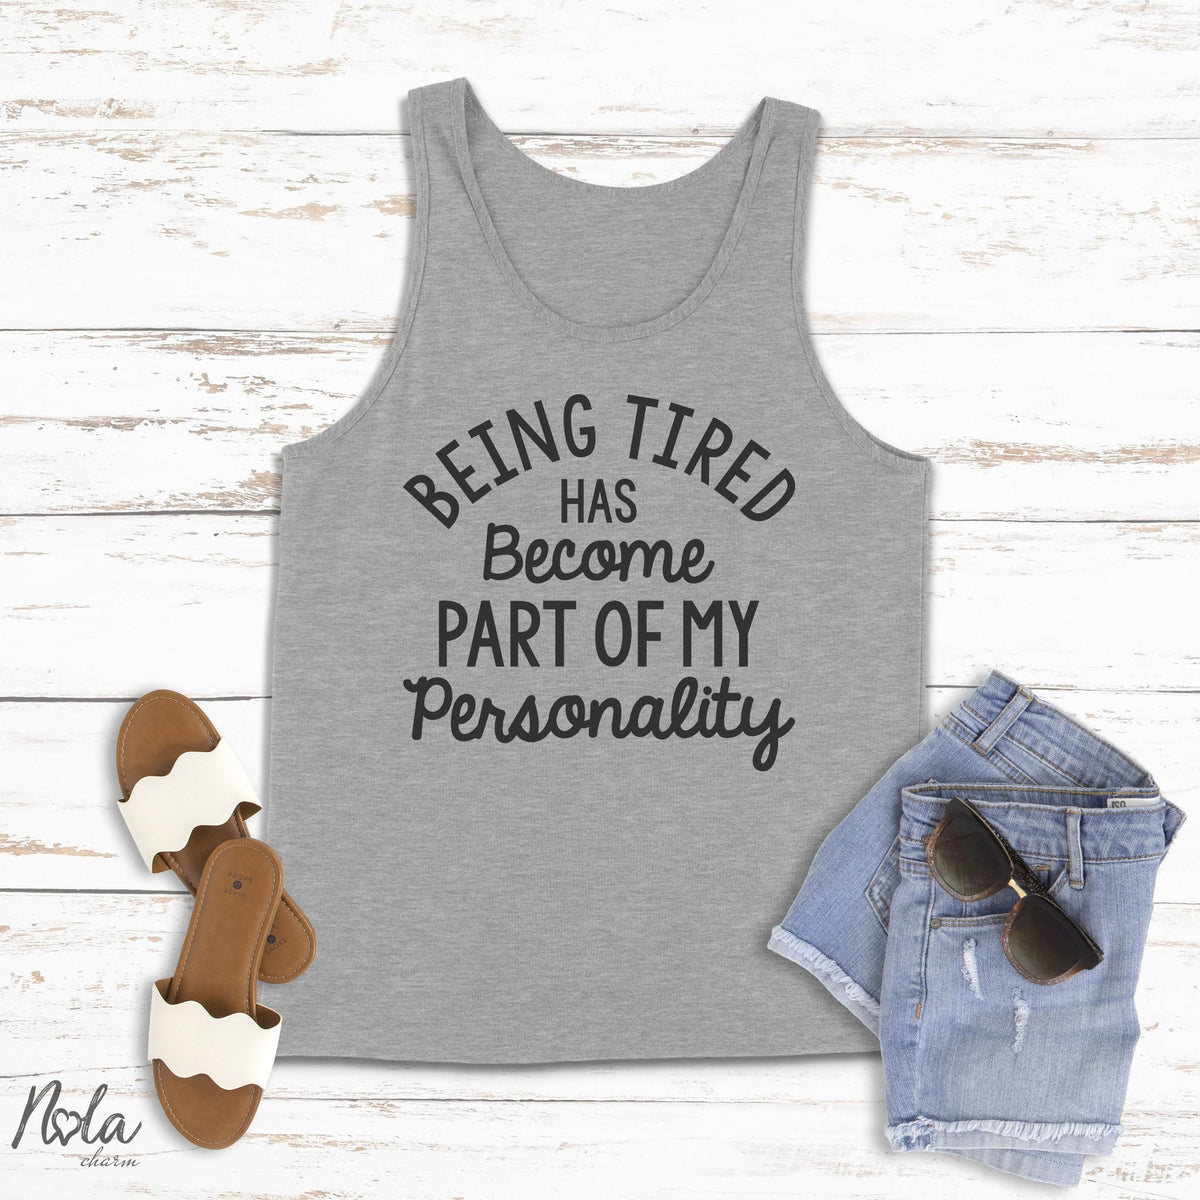 Being Tired Has Become Part Of My Personality - Nola Charm